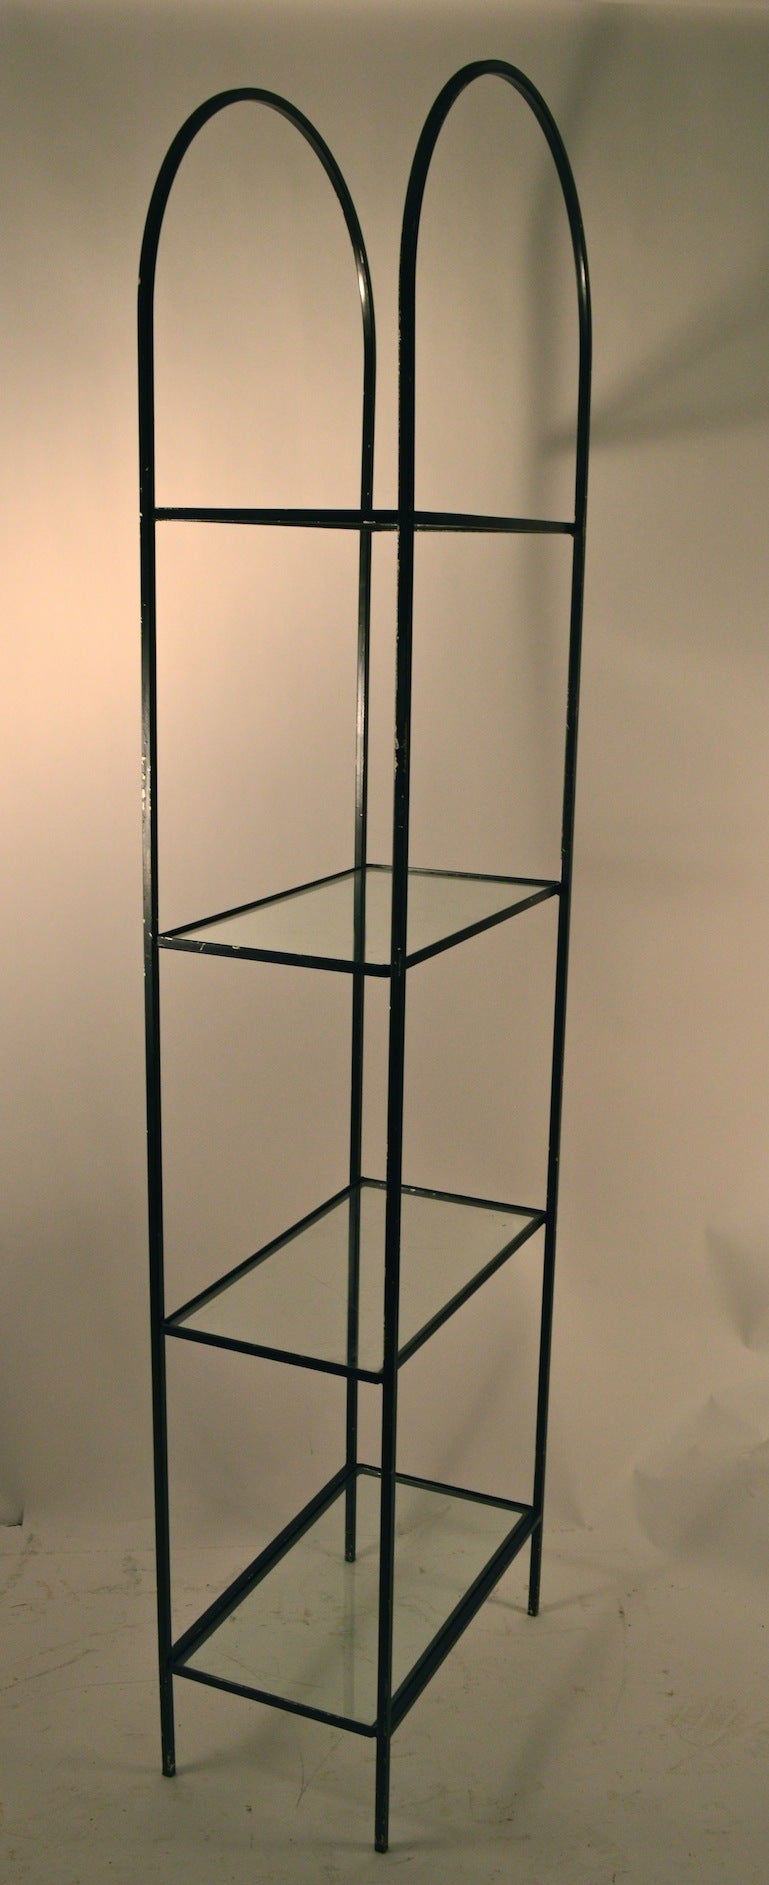 Interesting Mid Century  dome top metal and glass etagere. The black paint finish shows wear and is worn off in spots. We can repaint it black for you, or leave it in as found condition.